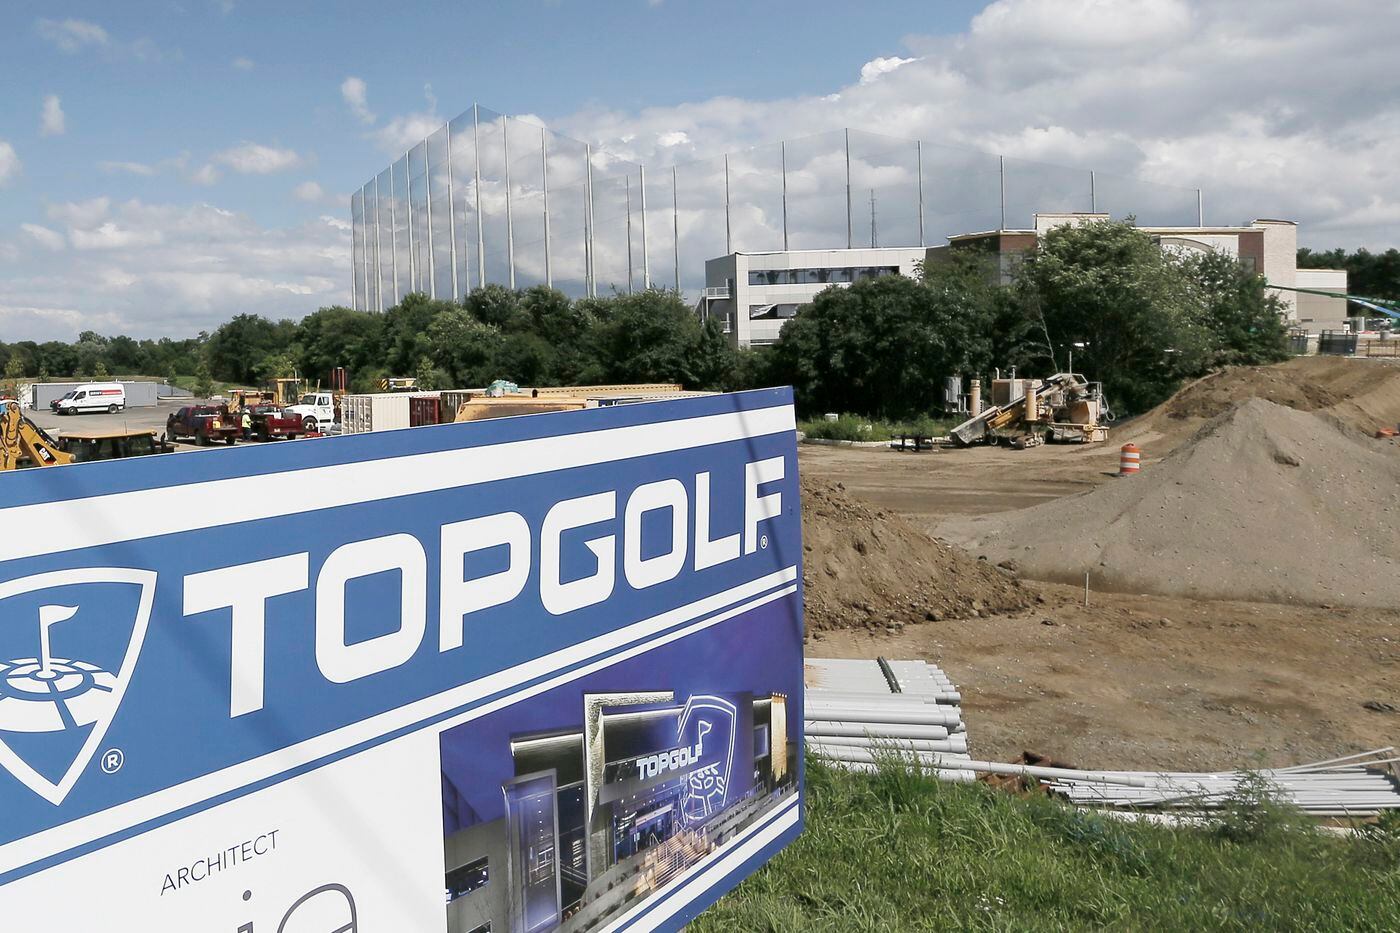 Top Shelf Liquor Trendy Food A Rooftop Terrace With A Firepit Music Oh And Golf Topgolf Is Coming Soon To Mount Laurel